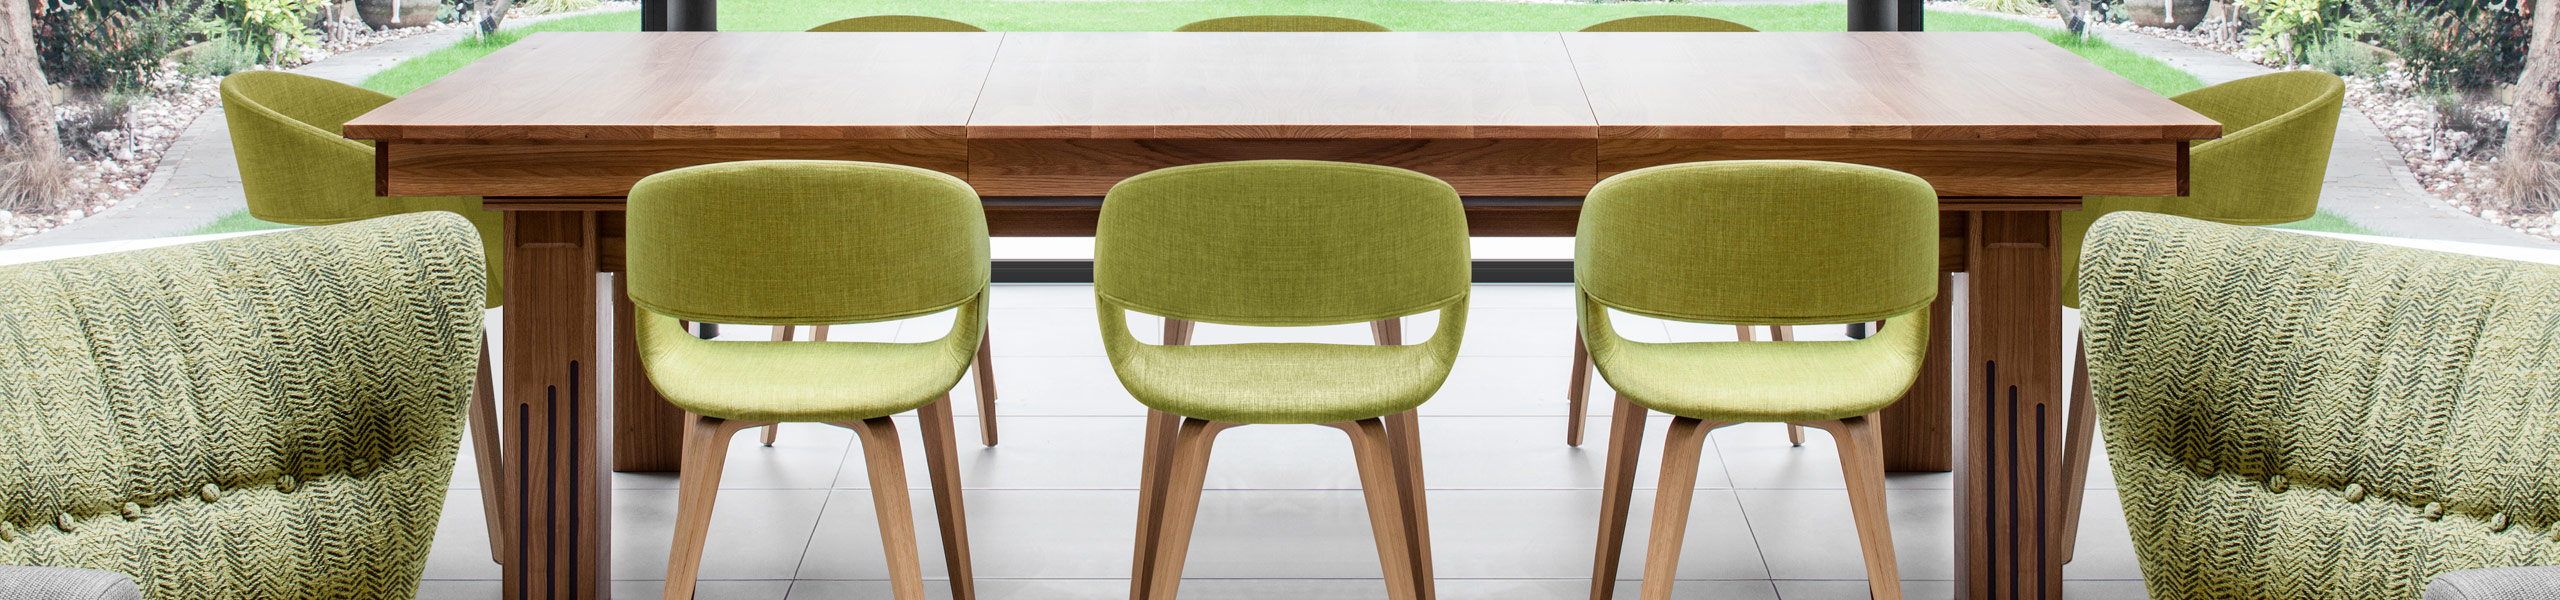 Marcus Dining Chair Green Video Banner